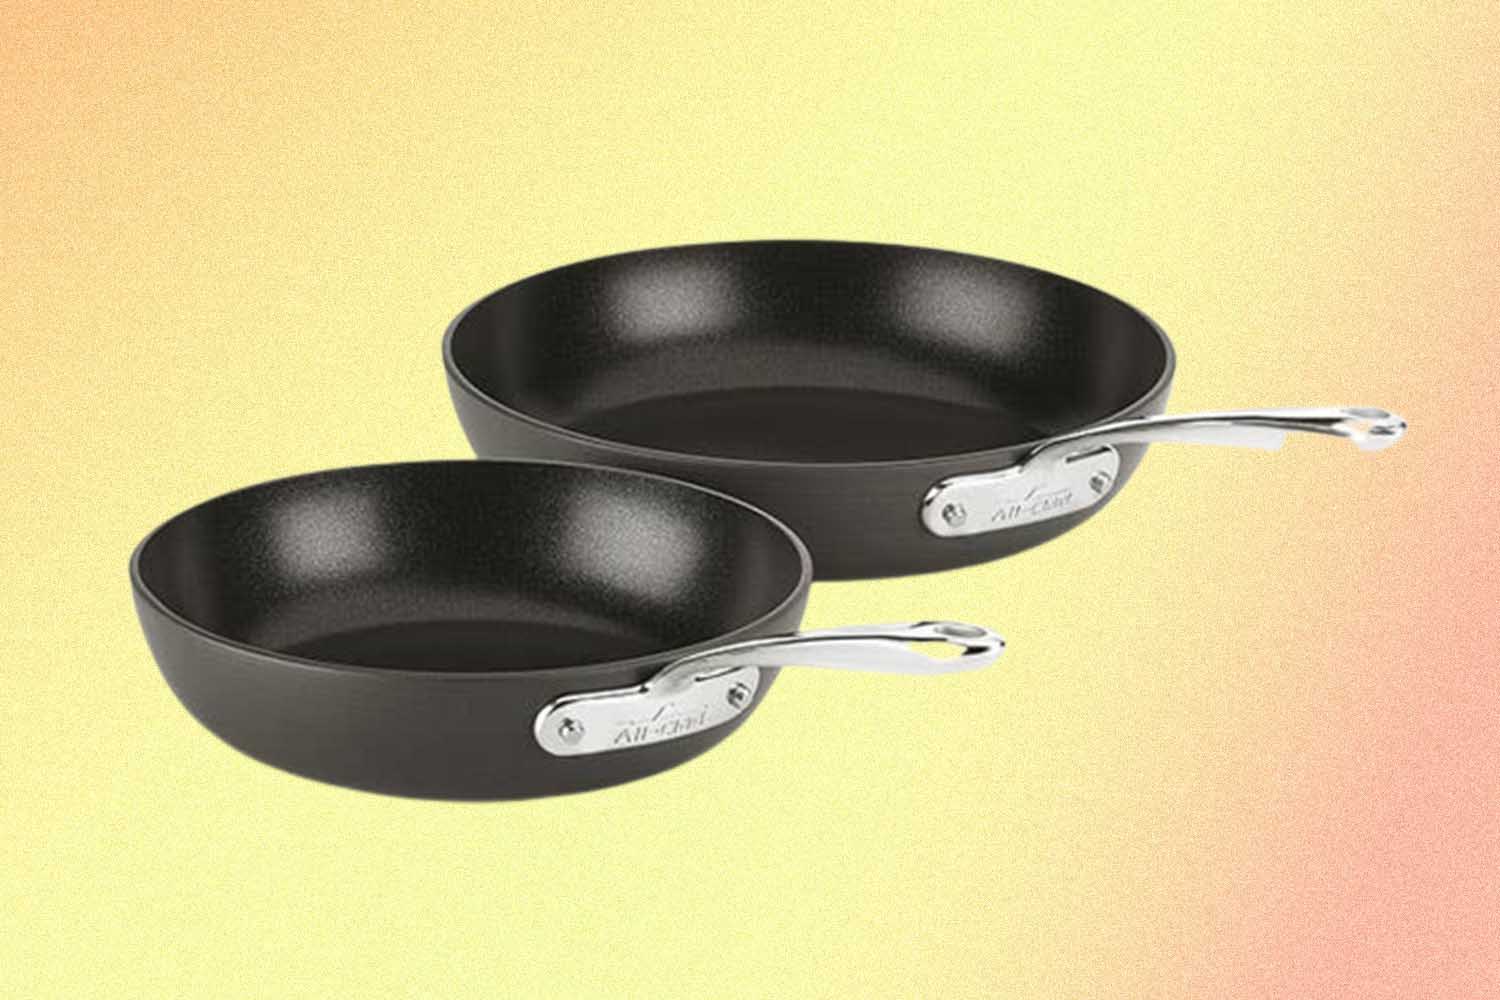 https://www.insidehook.com/wp-content/uploads/2023/01/8.522-and-10.5-Inch-Fry-Pan-Set-Essentials-Hard-Anodized.jpg?fit=1200%2C800